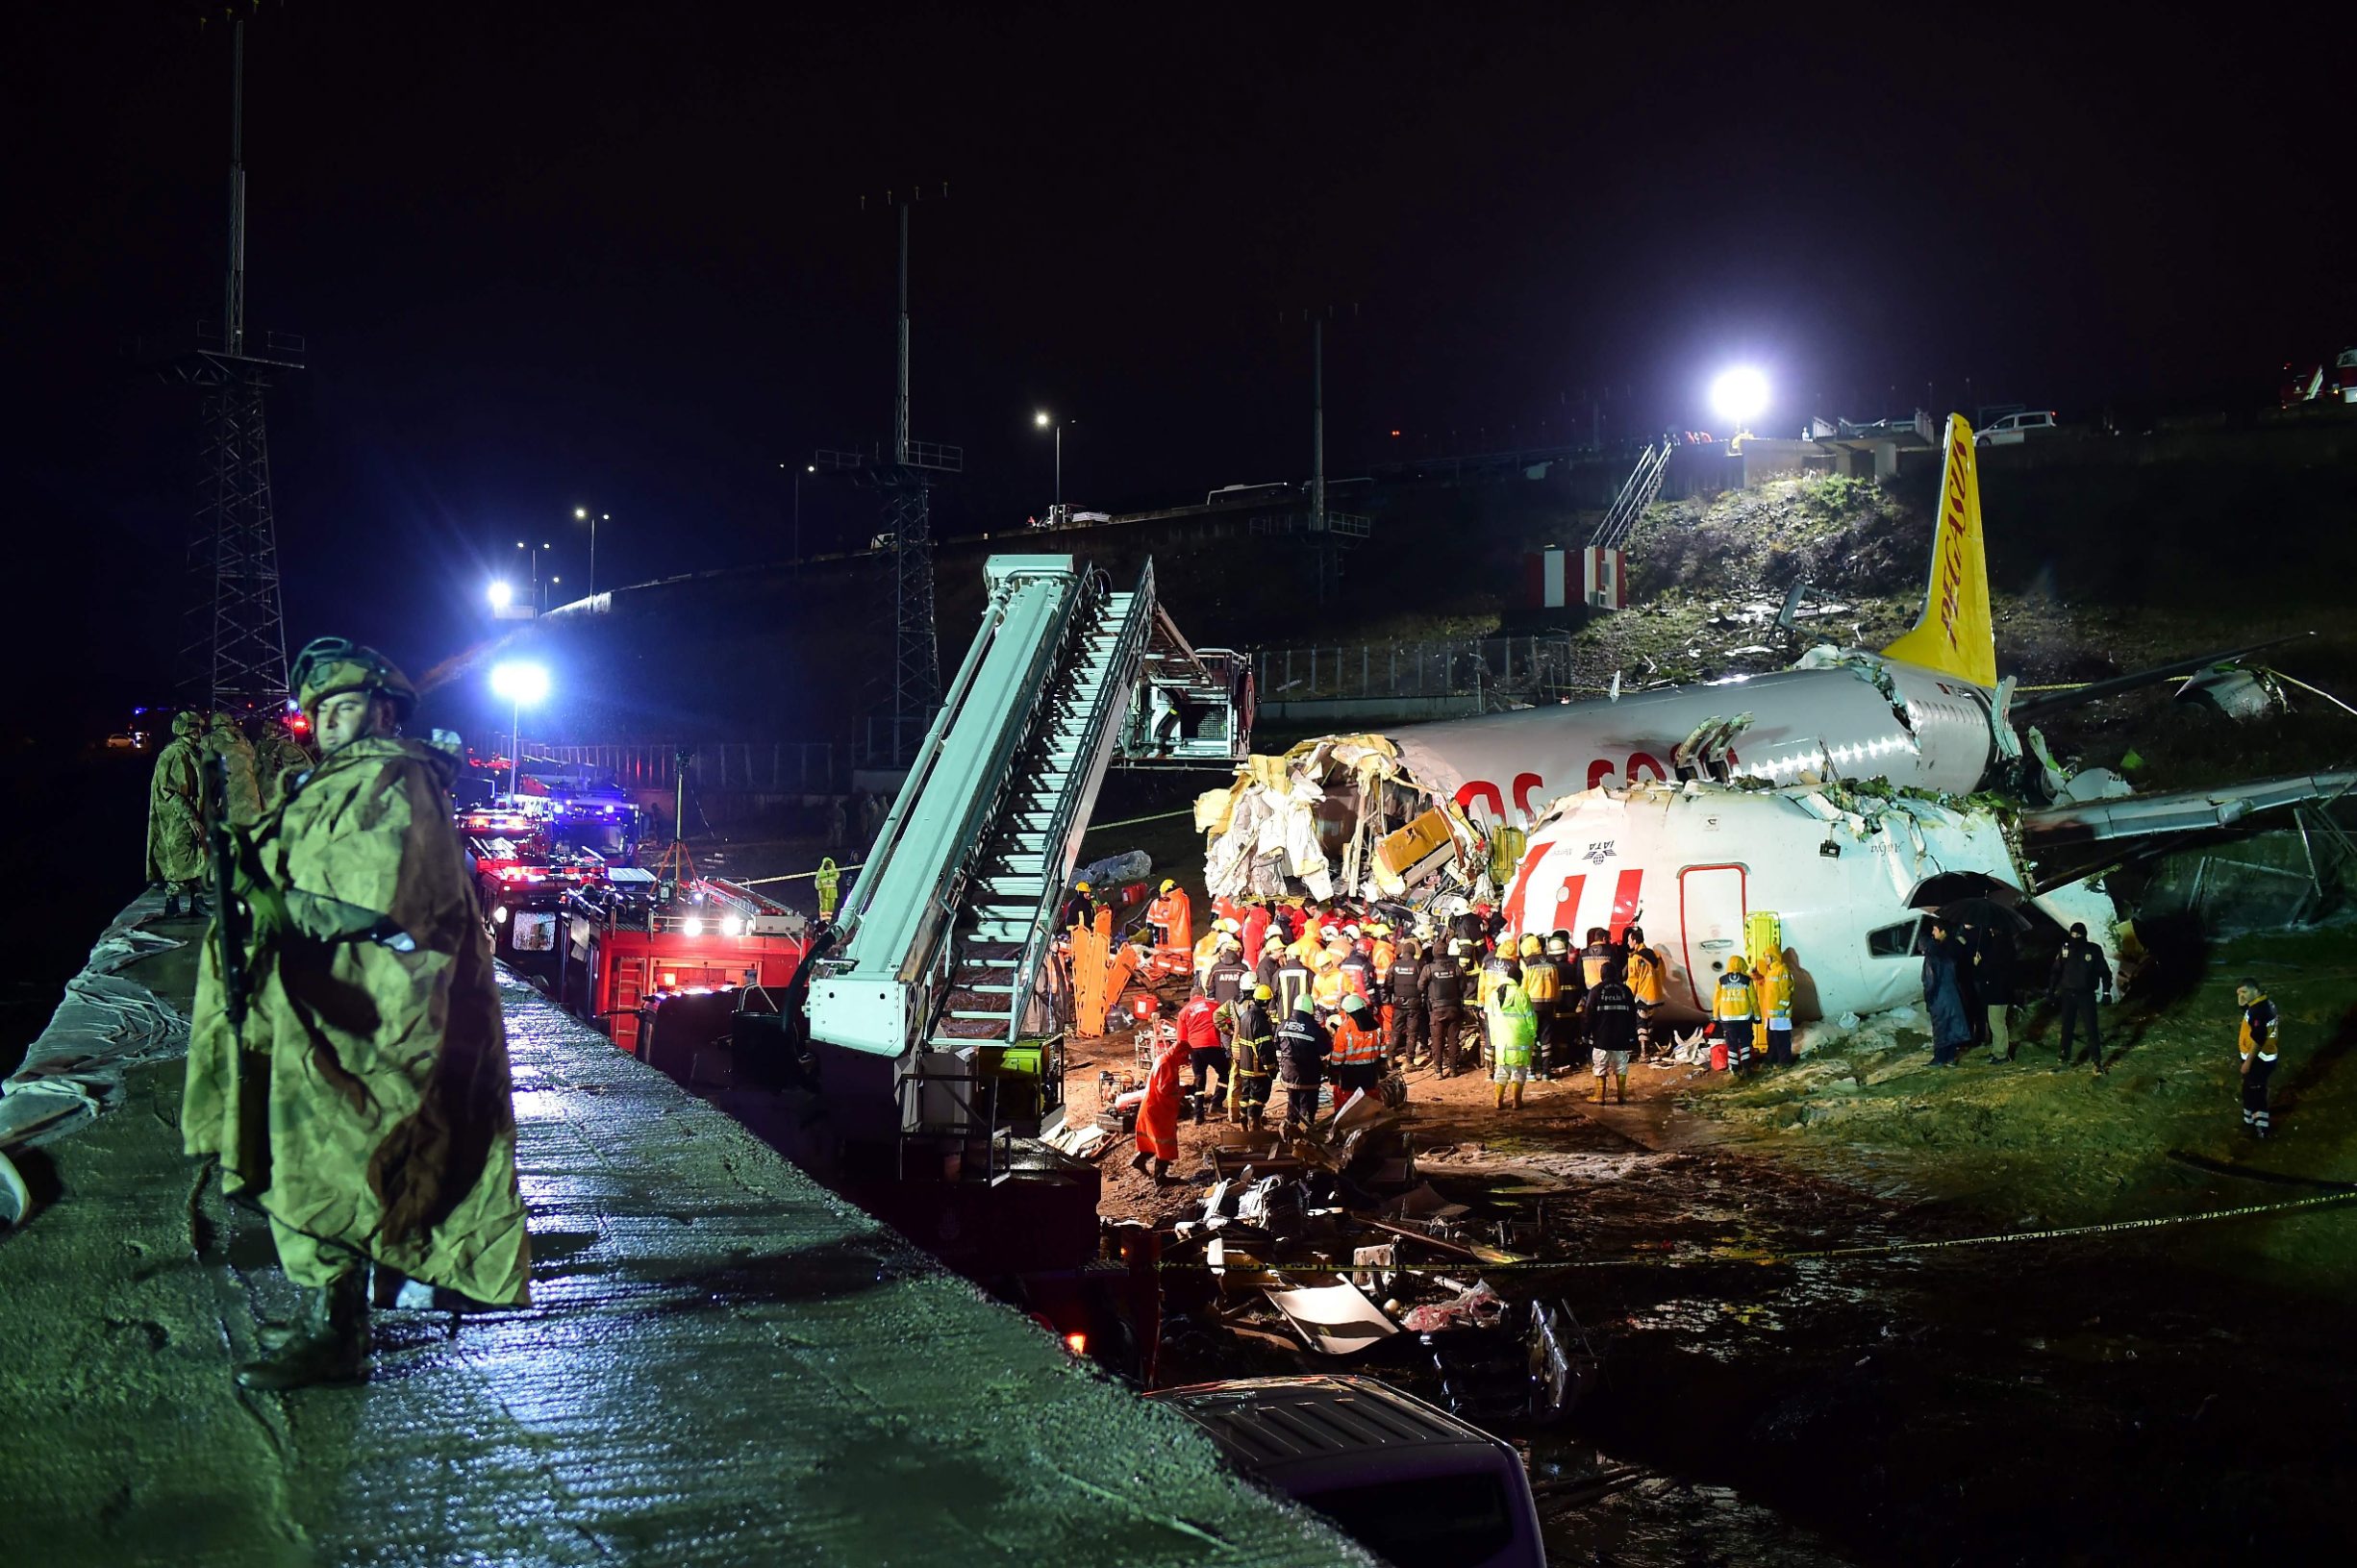 Rescuers work to extract passengers from the crash of a Pegasus Airlines Boeing 737 airplane, after it skidded off the runway upon landing at Sabiha Gokcen airport in Istanbul on February 5, 2020. - The plane carrying 171 passengers from the Aegean port city of Izmir split into three after landing in rough weather. Officials said no-one had lost their lives in the accident, but dozens of people were injured. (Photo by Yasin AKGUL / AFP)